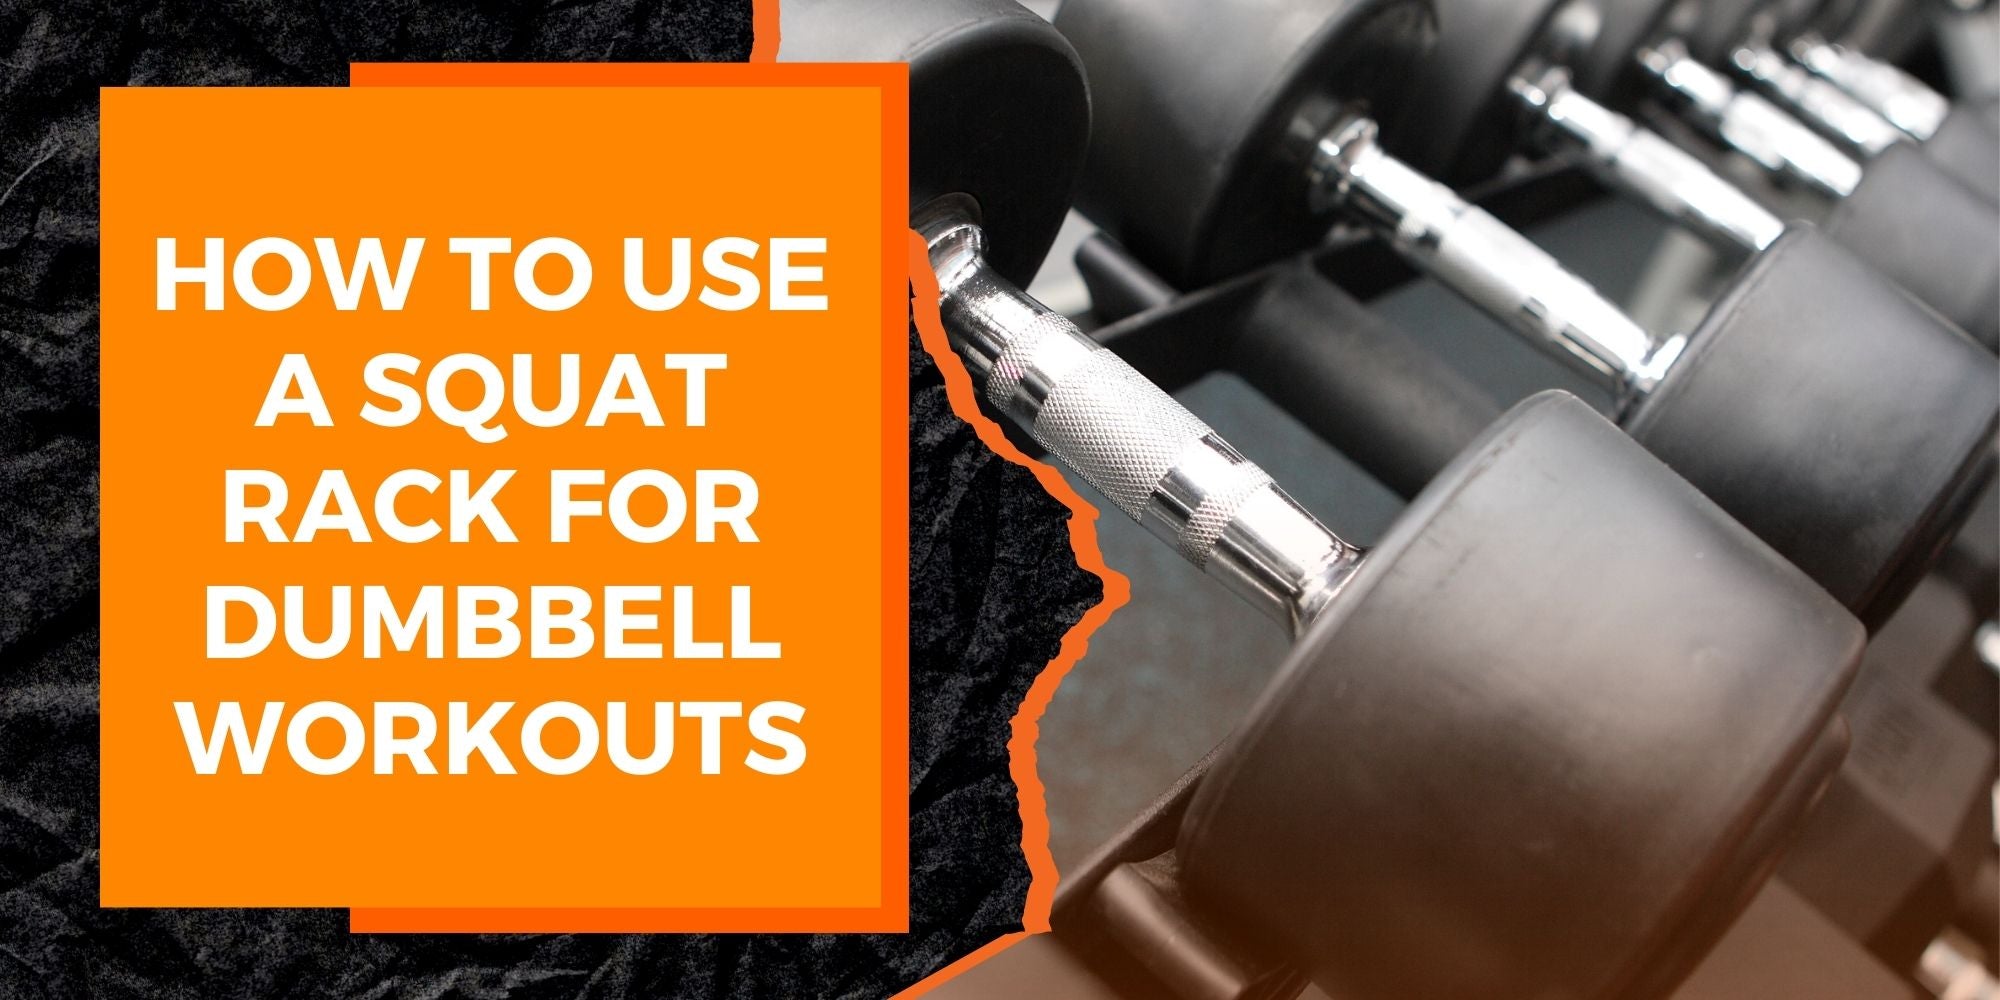 How to Use a Squat Rack for Dumbbell Workouts